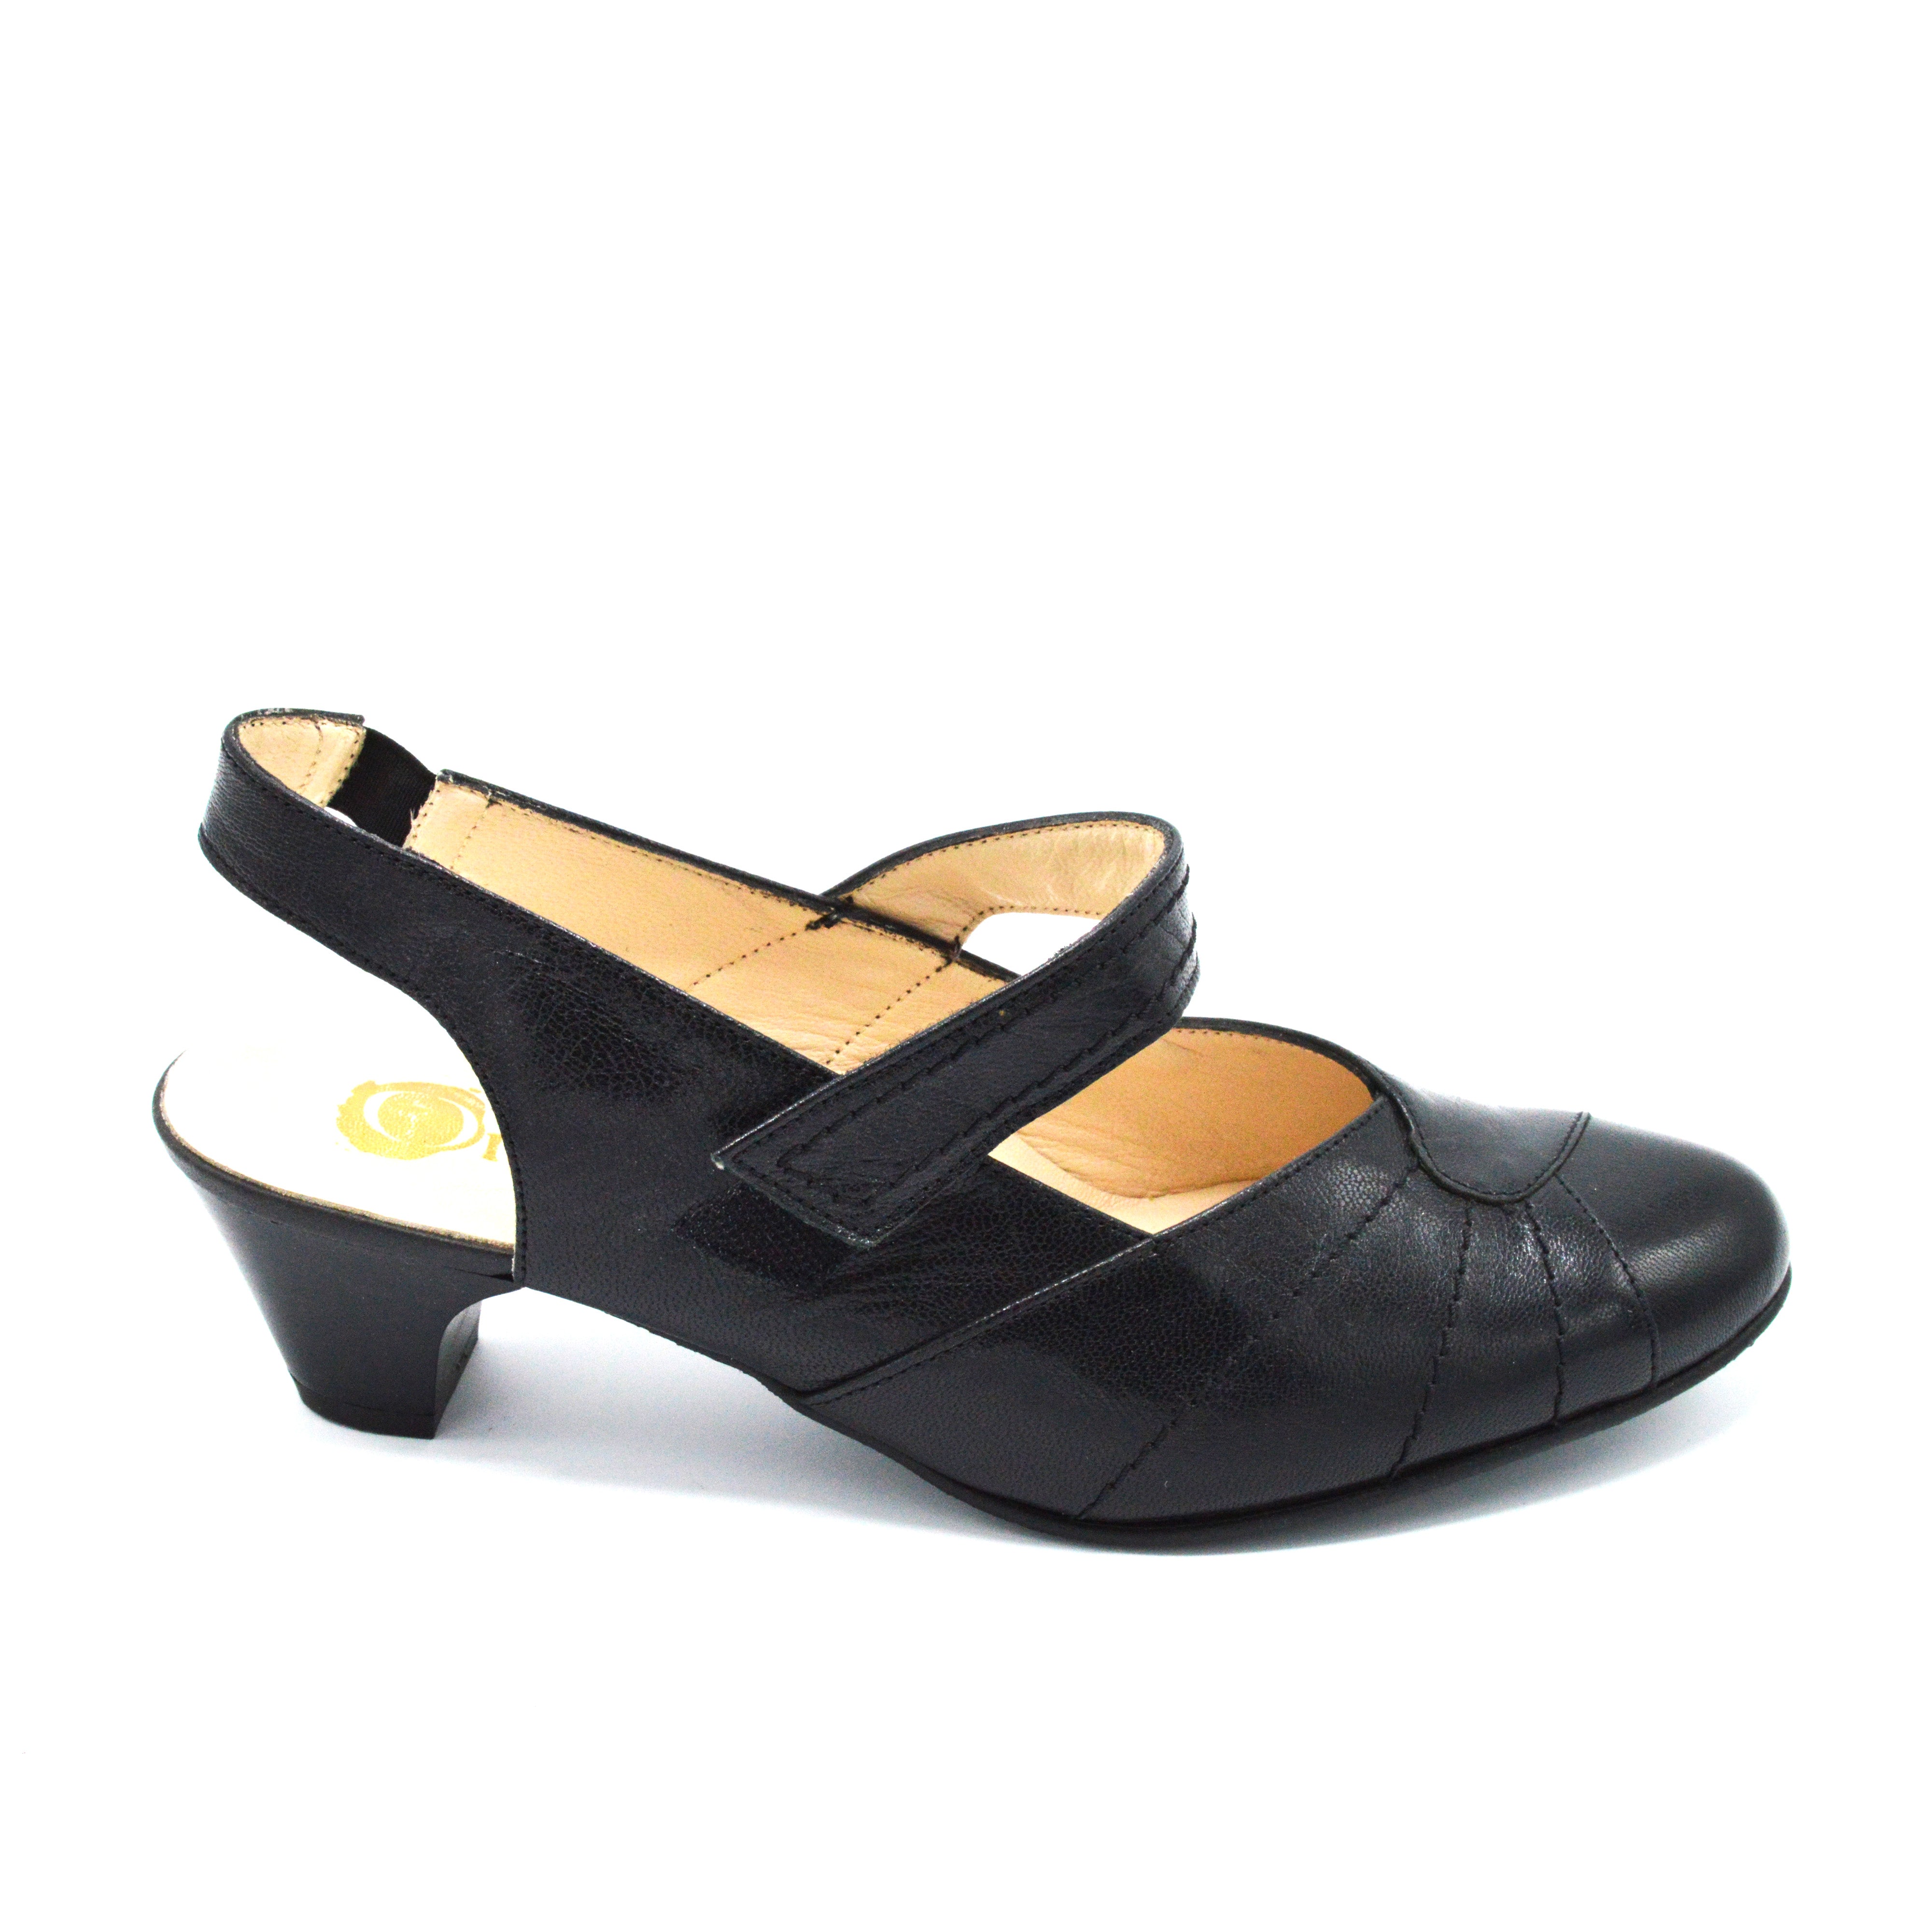 Fablo By Ombella - Ladies Wide Fit Dress Shoe - 2E Fitting - Black